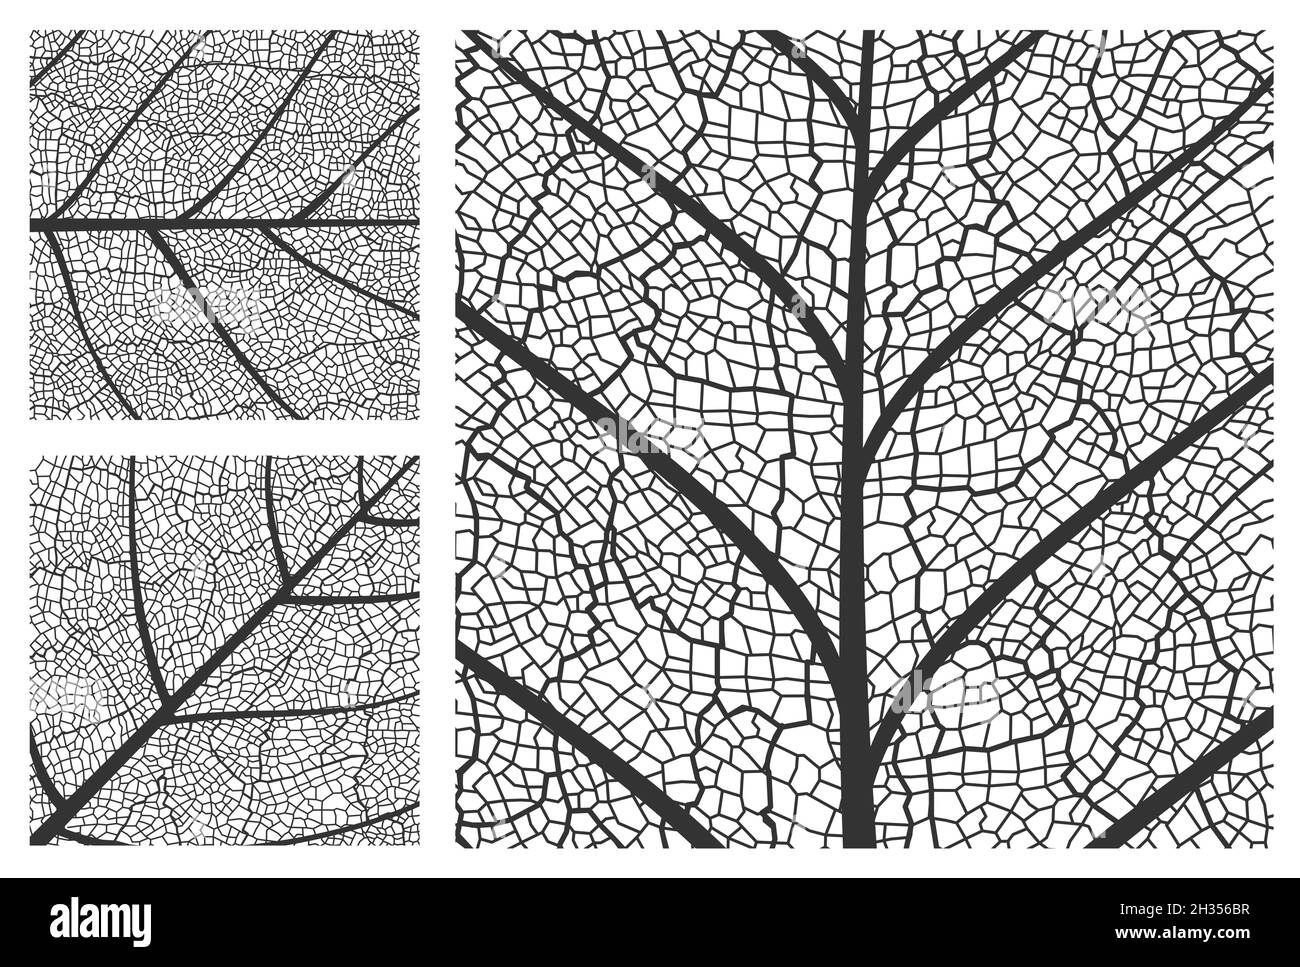 Leaf texture pattern background, vector closeup plant leaf pattern with veins and cells. Foliage and floral nature ornament design of tree leaf in bla Stock Vector